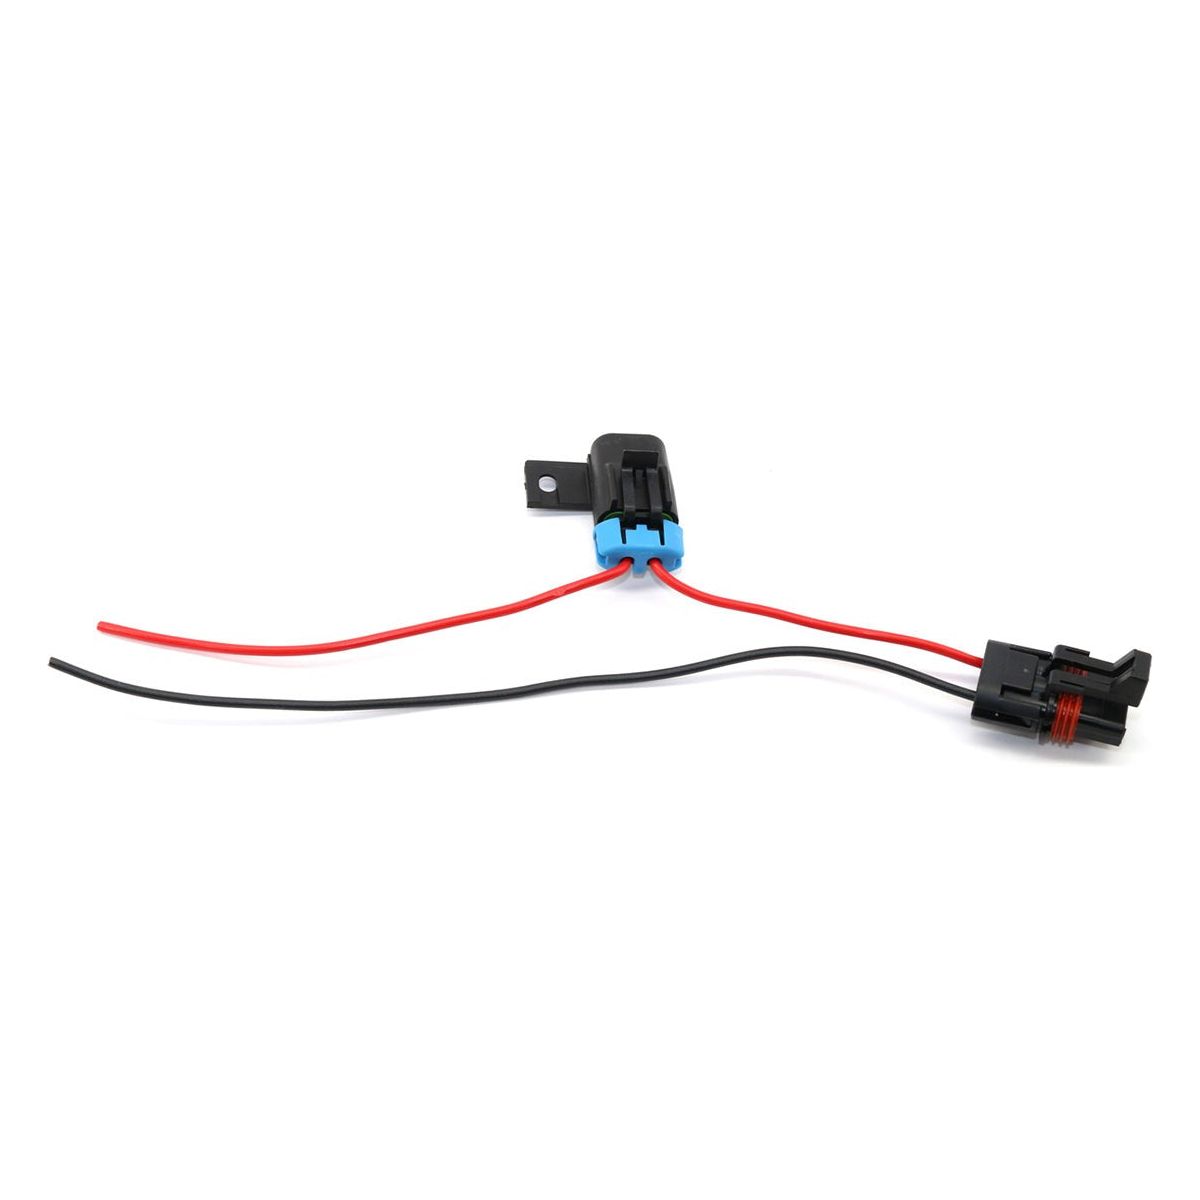 Polaris Pulse Busbar Accessory Wiring Harness with 14 Gauge Fused 12v/GND Wires | XTC Power Products